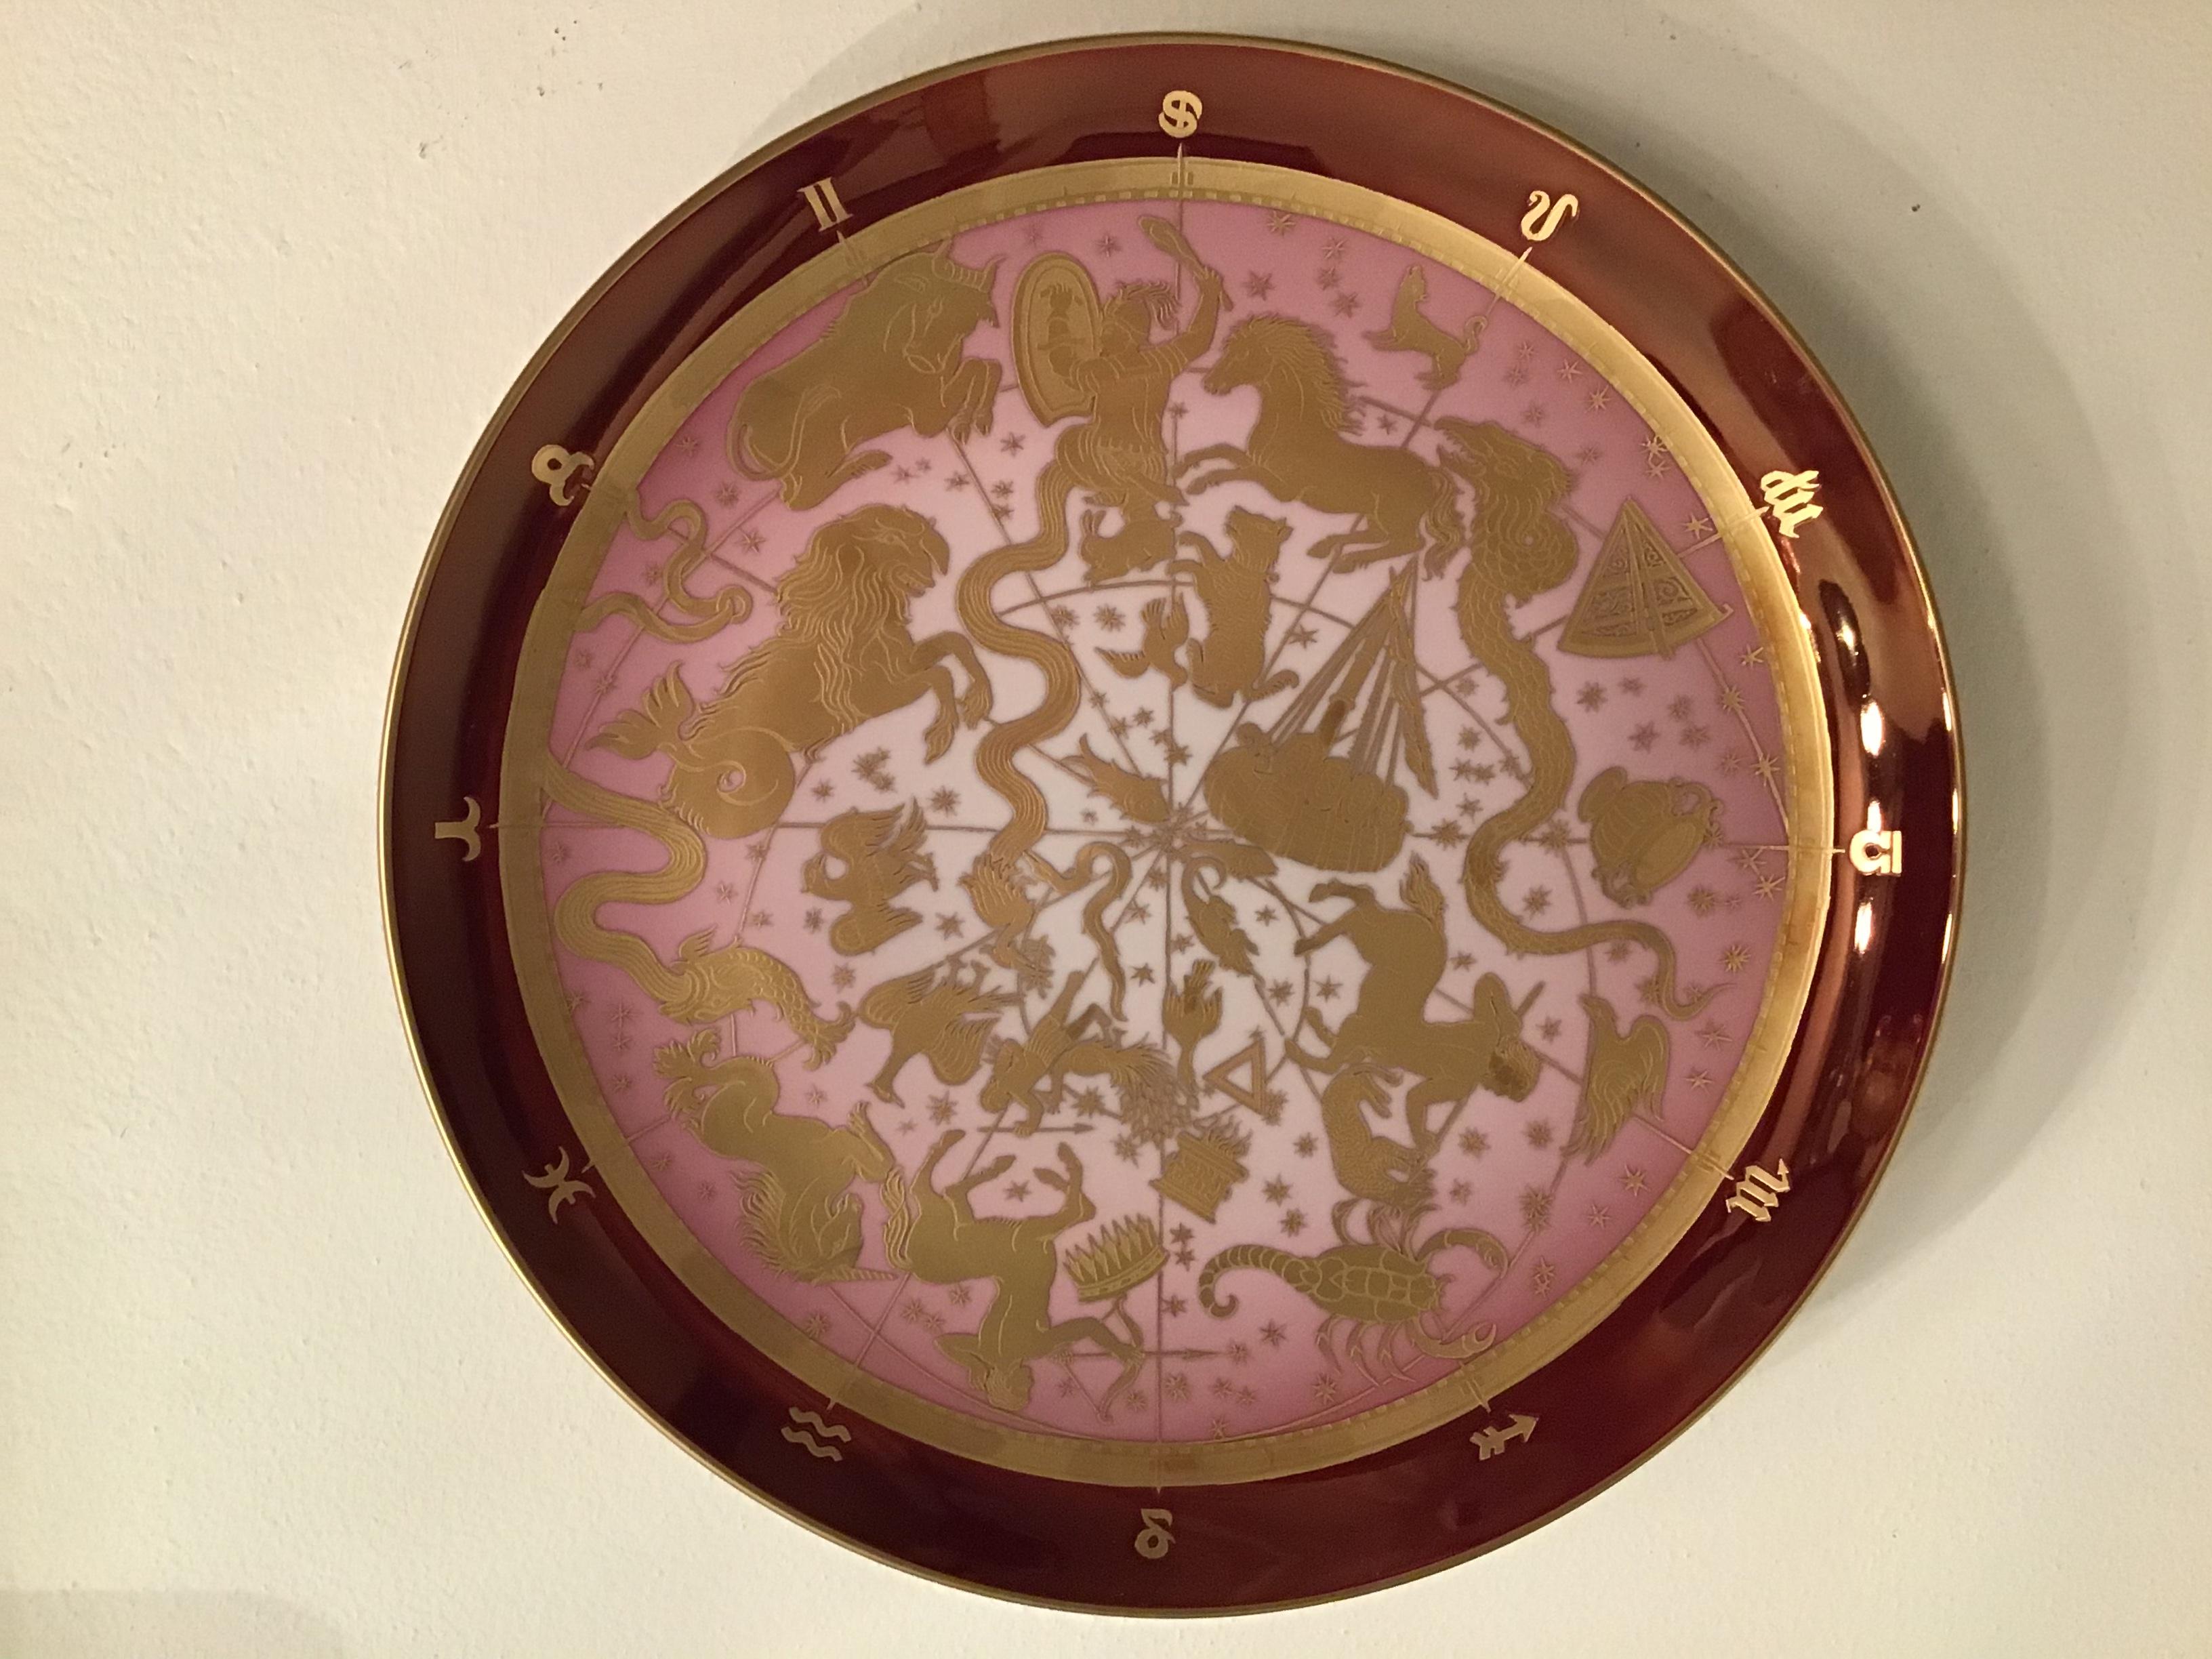 Mid-20th Century Morbelli Porcelain Wall Plate “Planisfero Celeste“ Worked with Pure Gold 1960 IT For Sale